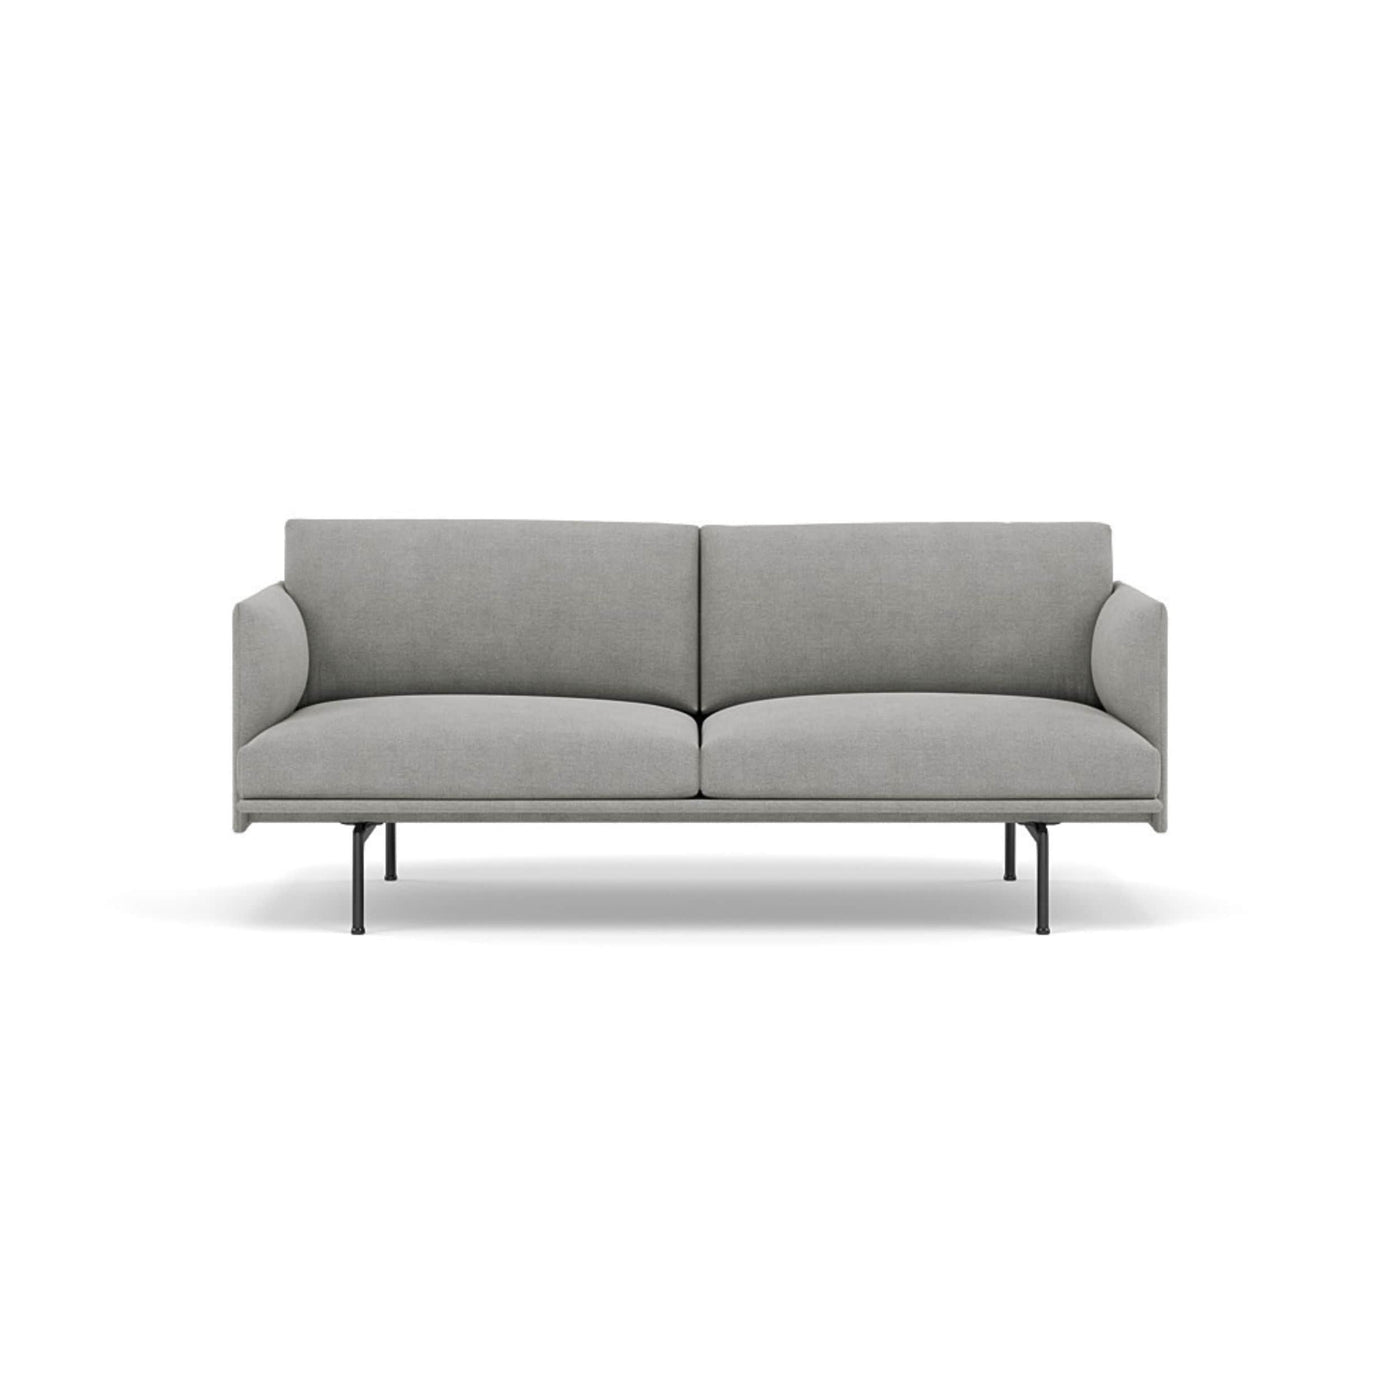 Muuto Outline Studio Sofa 170 in Fiord 151 grey and black legs. Made to order from someday designs. #colour_fiord-151